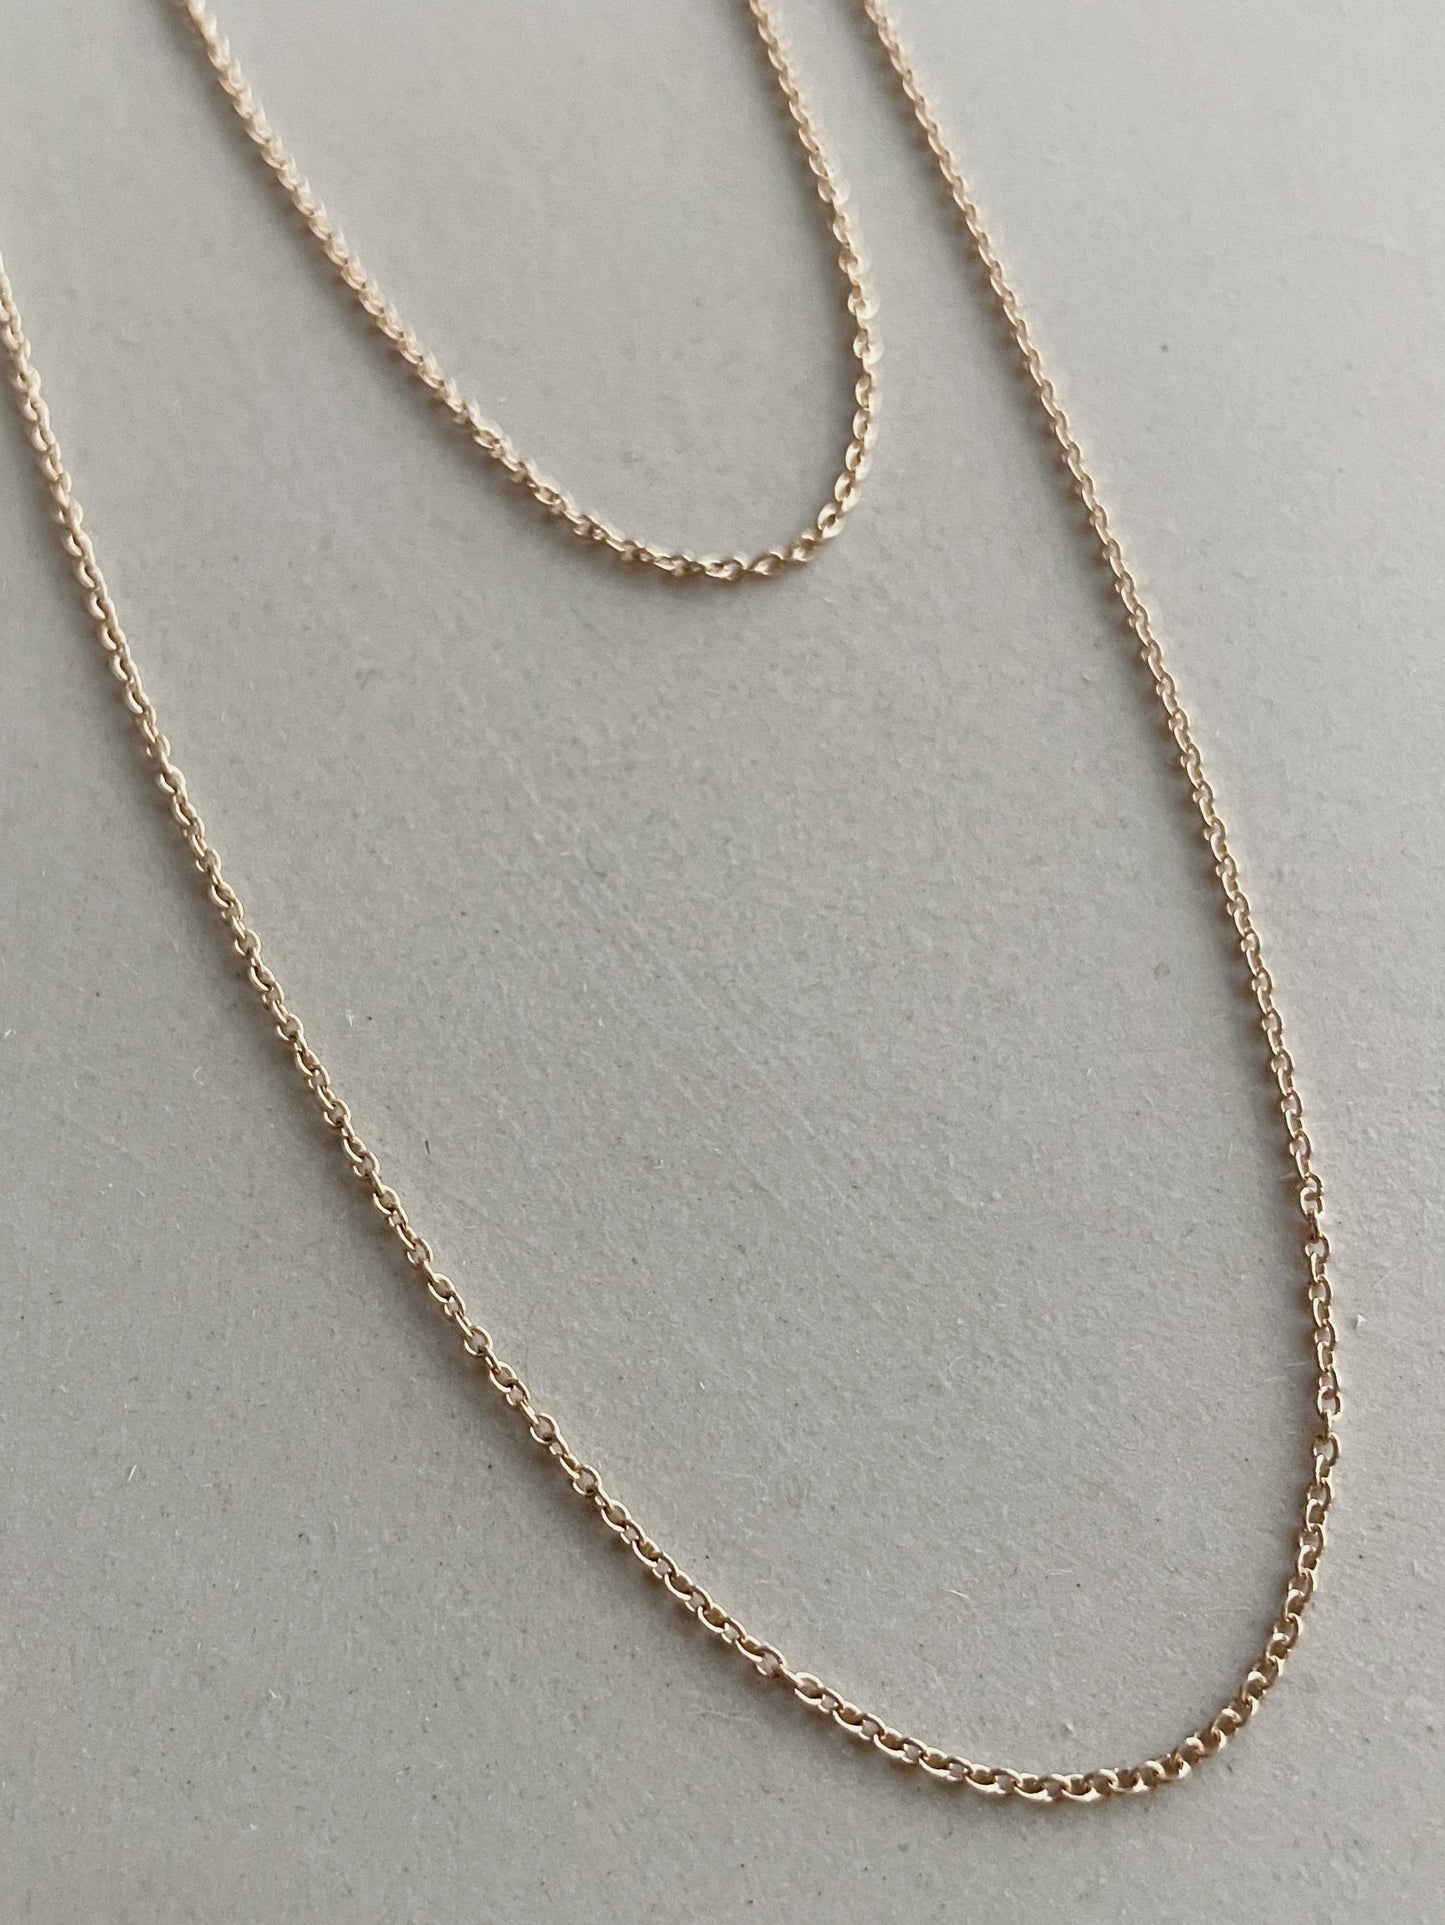 Nude Chain | 16 inch - Also, Freedom